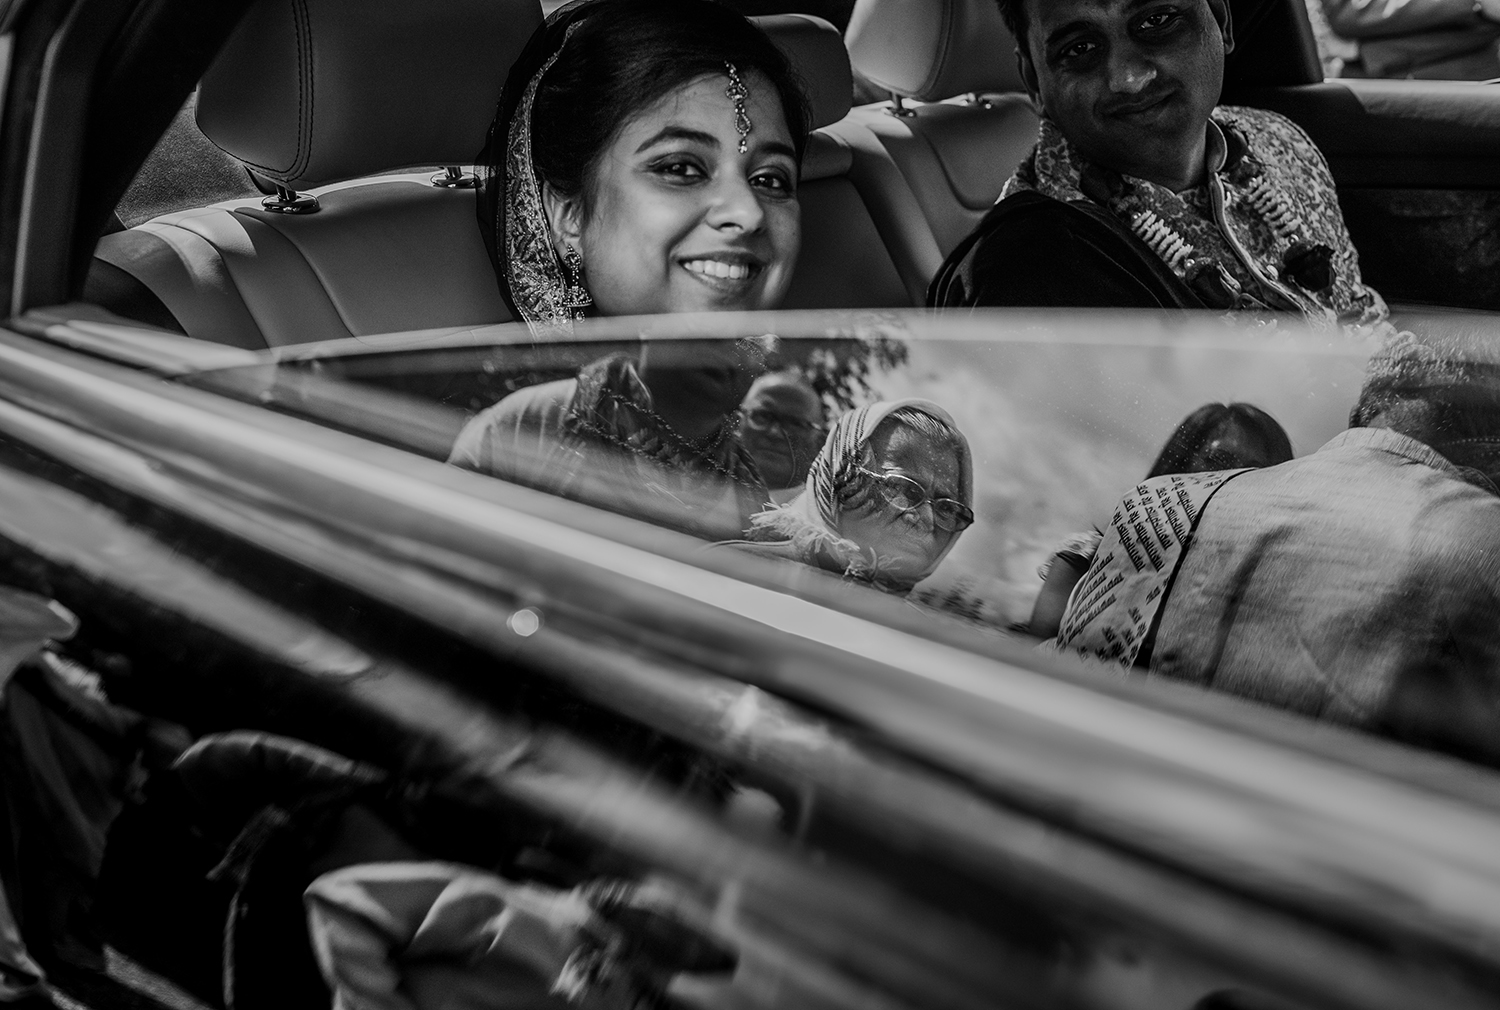  bw photo. Brides grandmother reflecting in the car window 